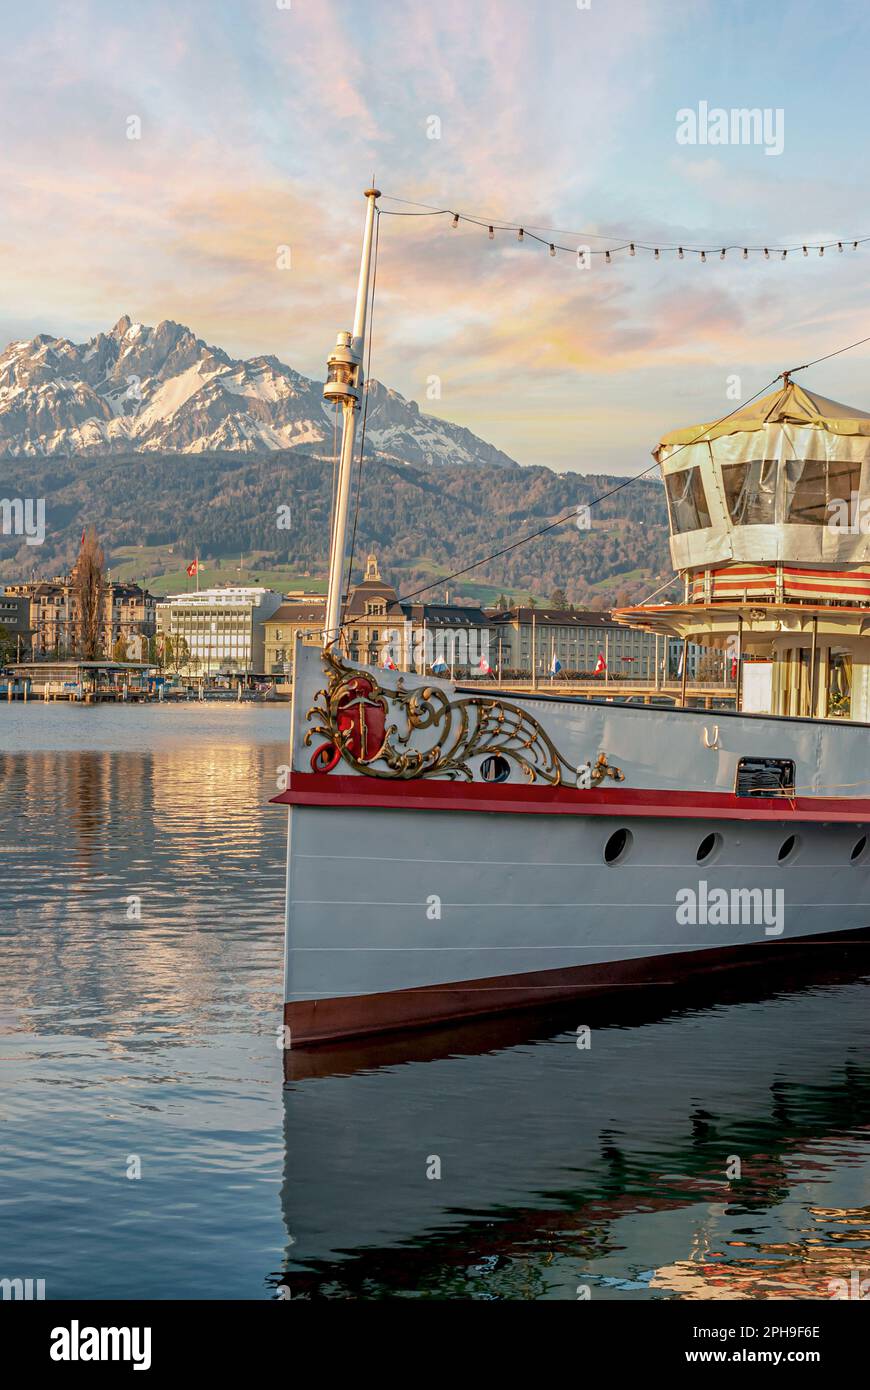 Keel of Steamboat at Schweizerhof Quay with Mount Pilatus in the background at dusk, Lucerne, Switzerland Stock Photo